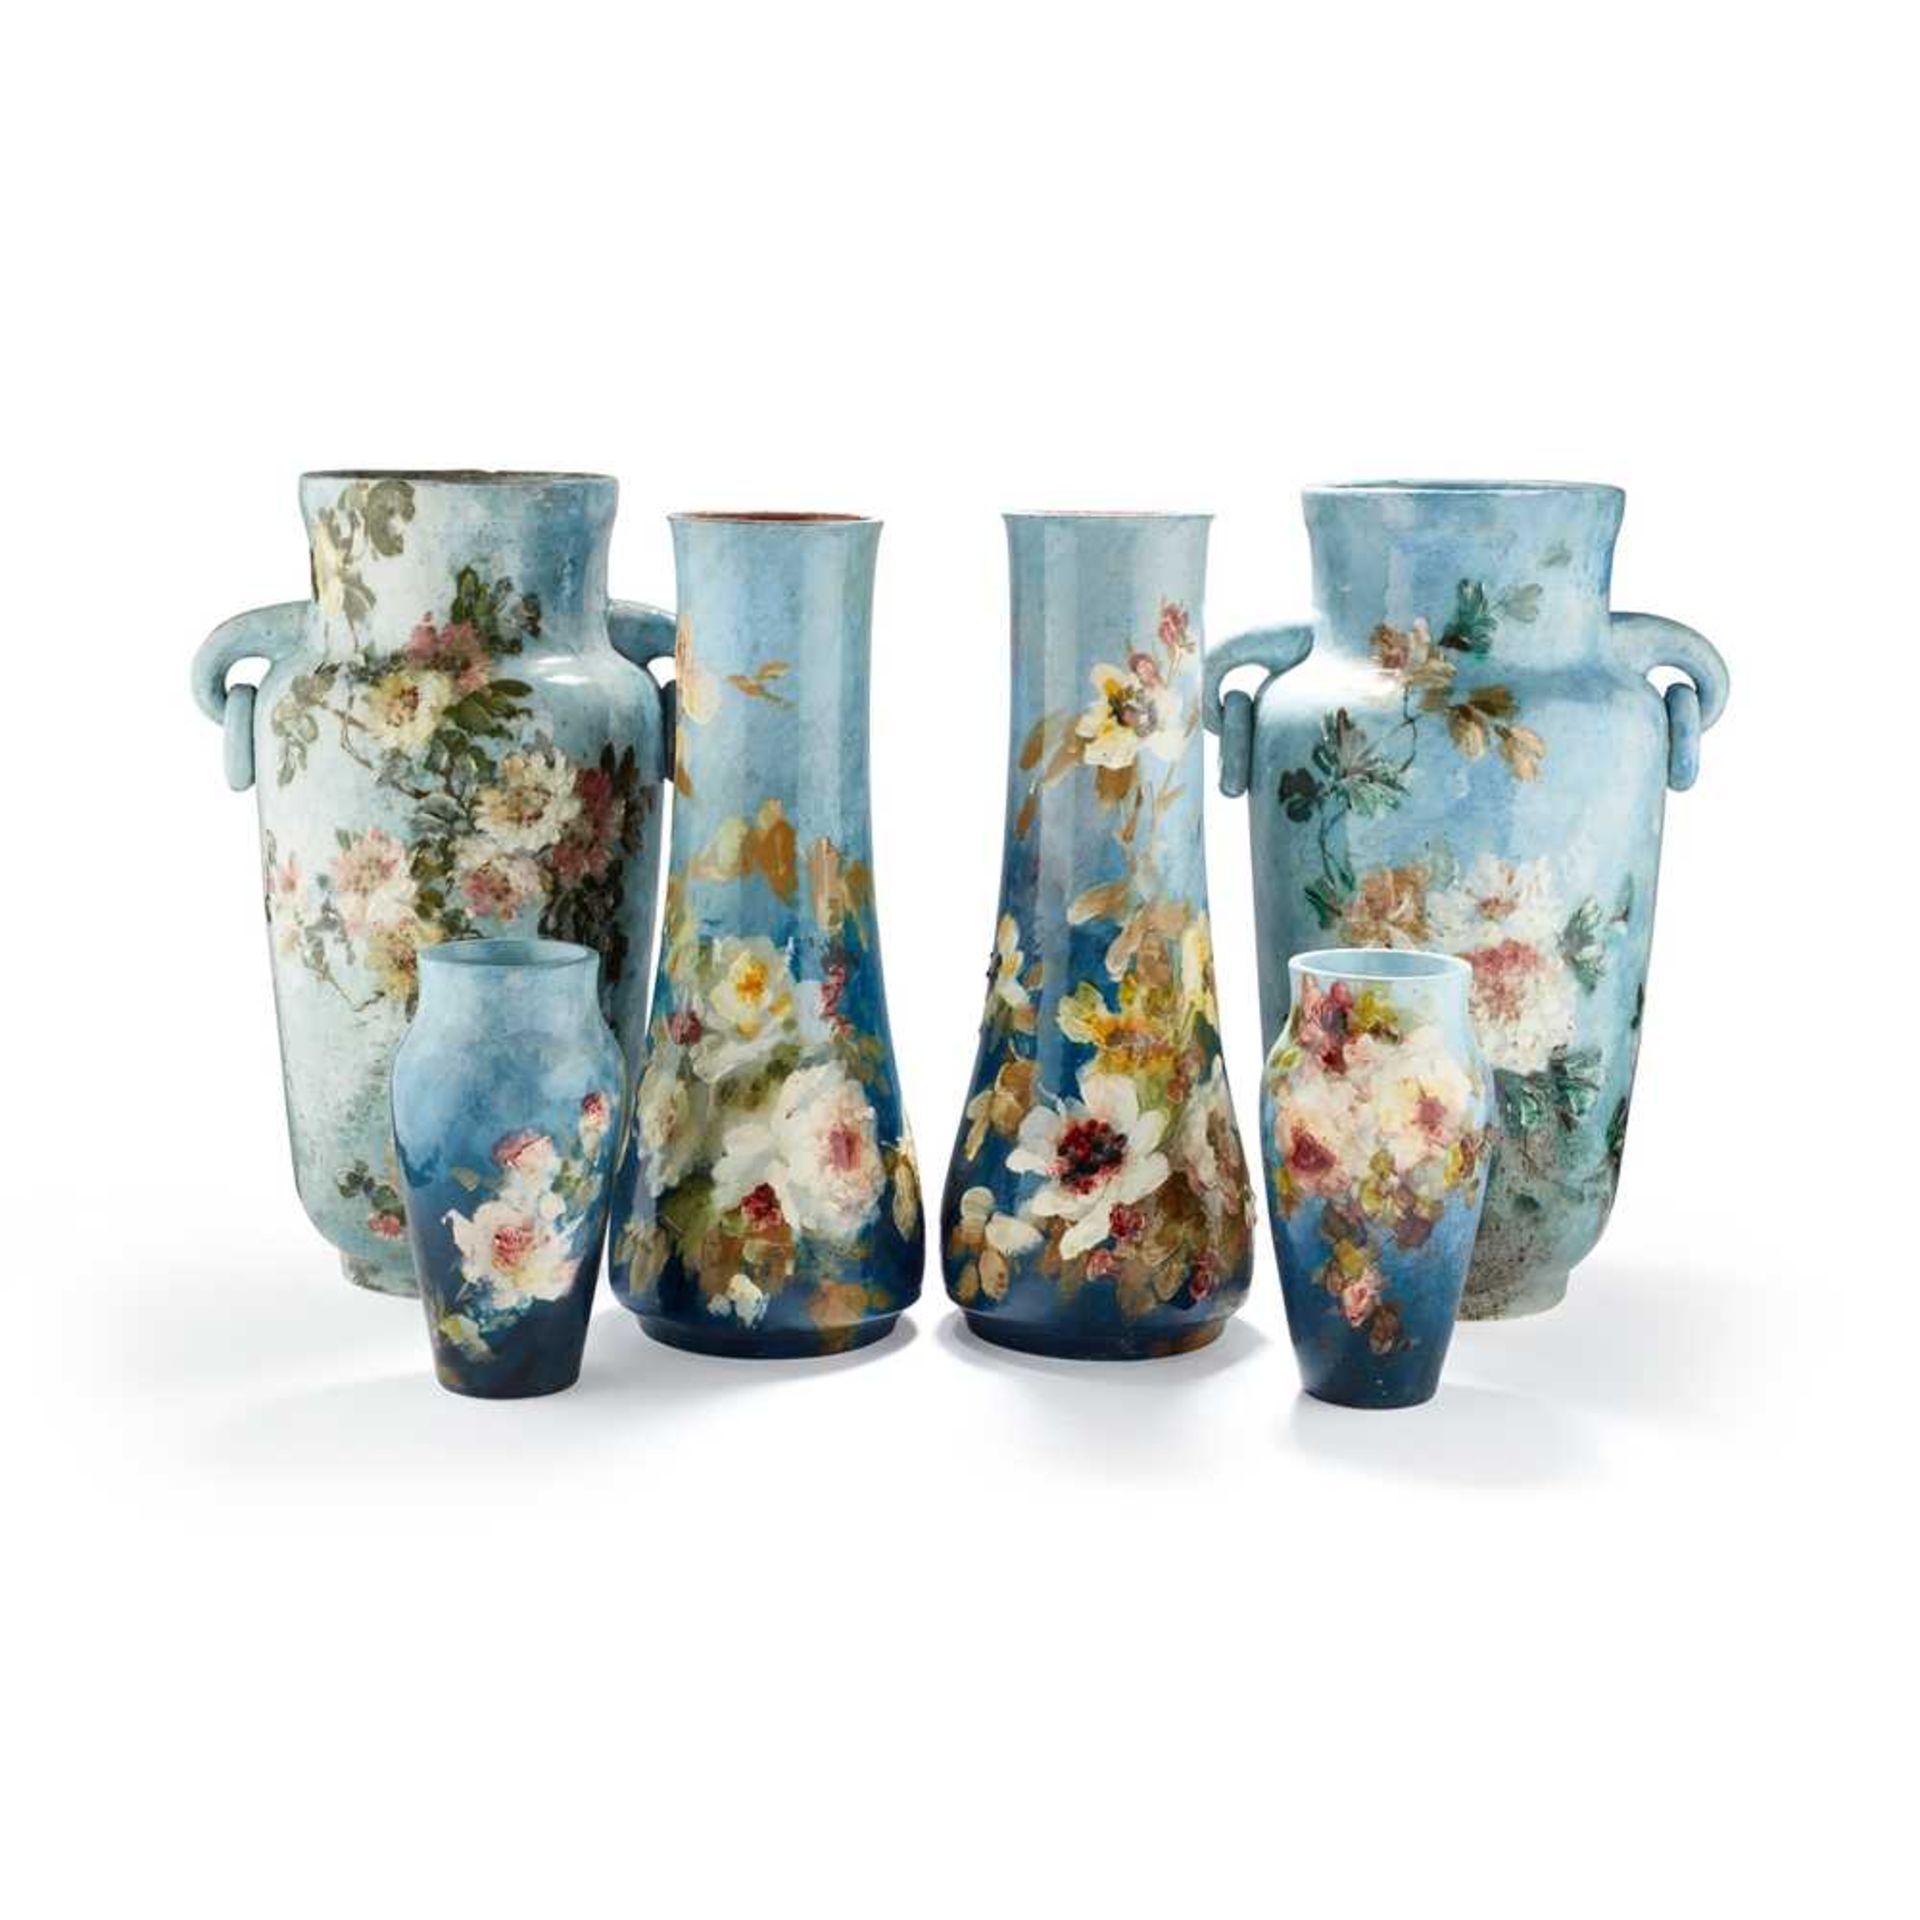 DOMINIQUE GRENET (1821-1885) TWO TWIN-HANDLED FAIENCE VASES, CIRCA 1875